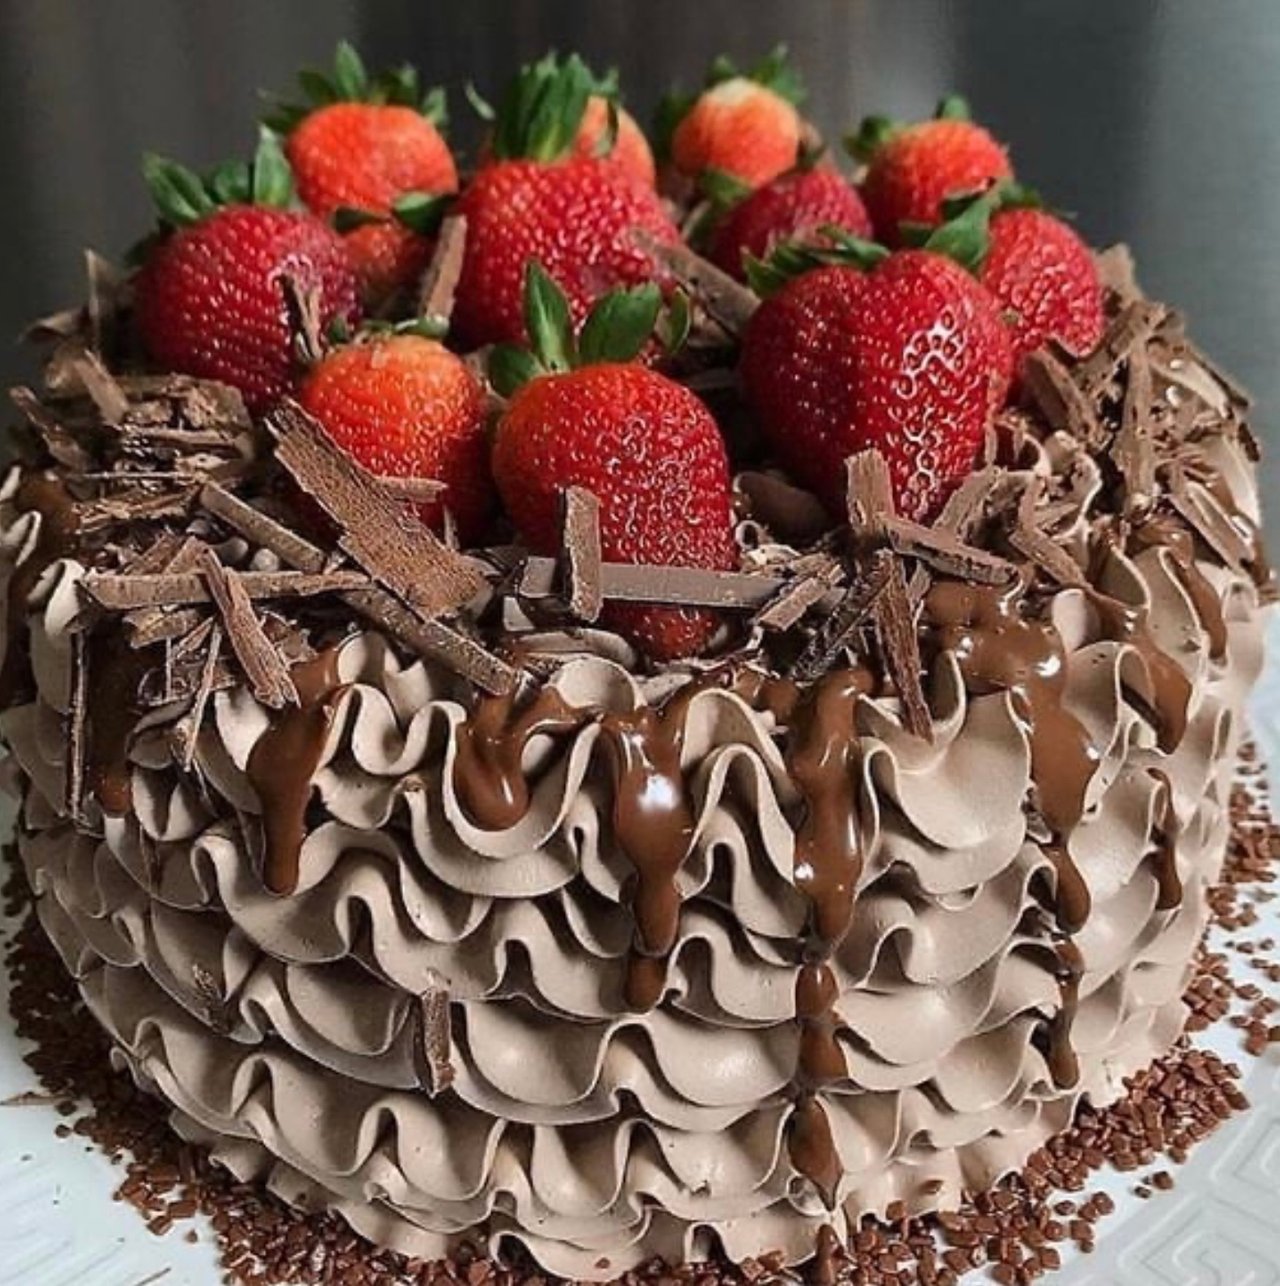 Chocolate Fudge Cake with Strawberry and Twix : The making of a birthday  cake « Bong Appetite..